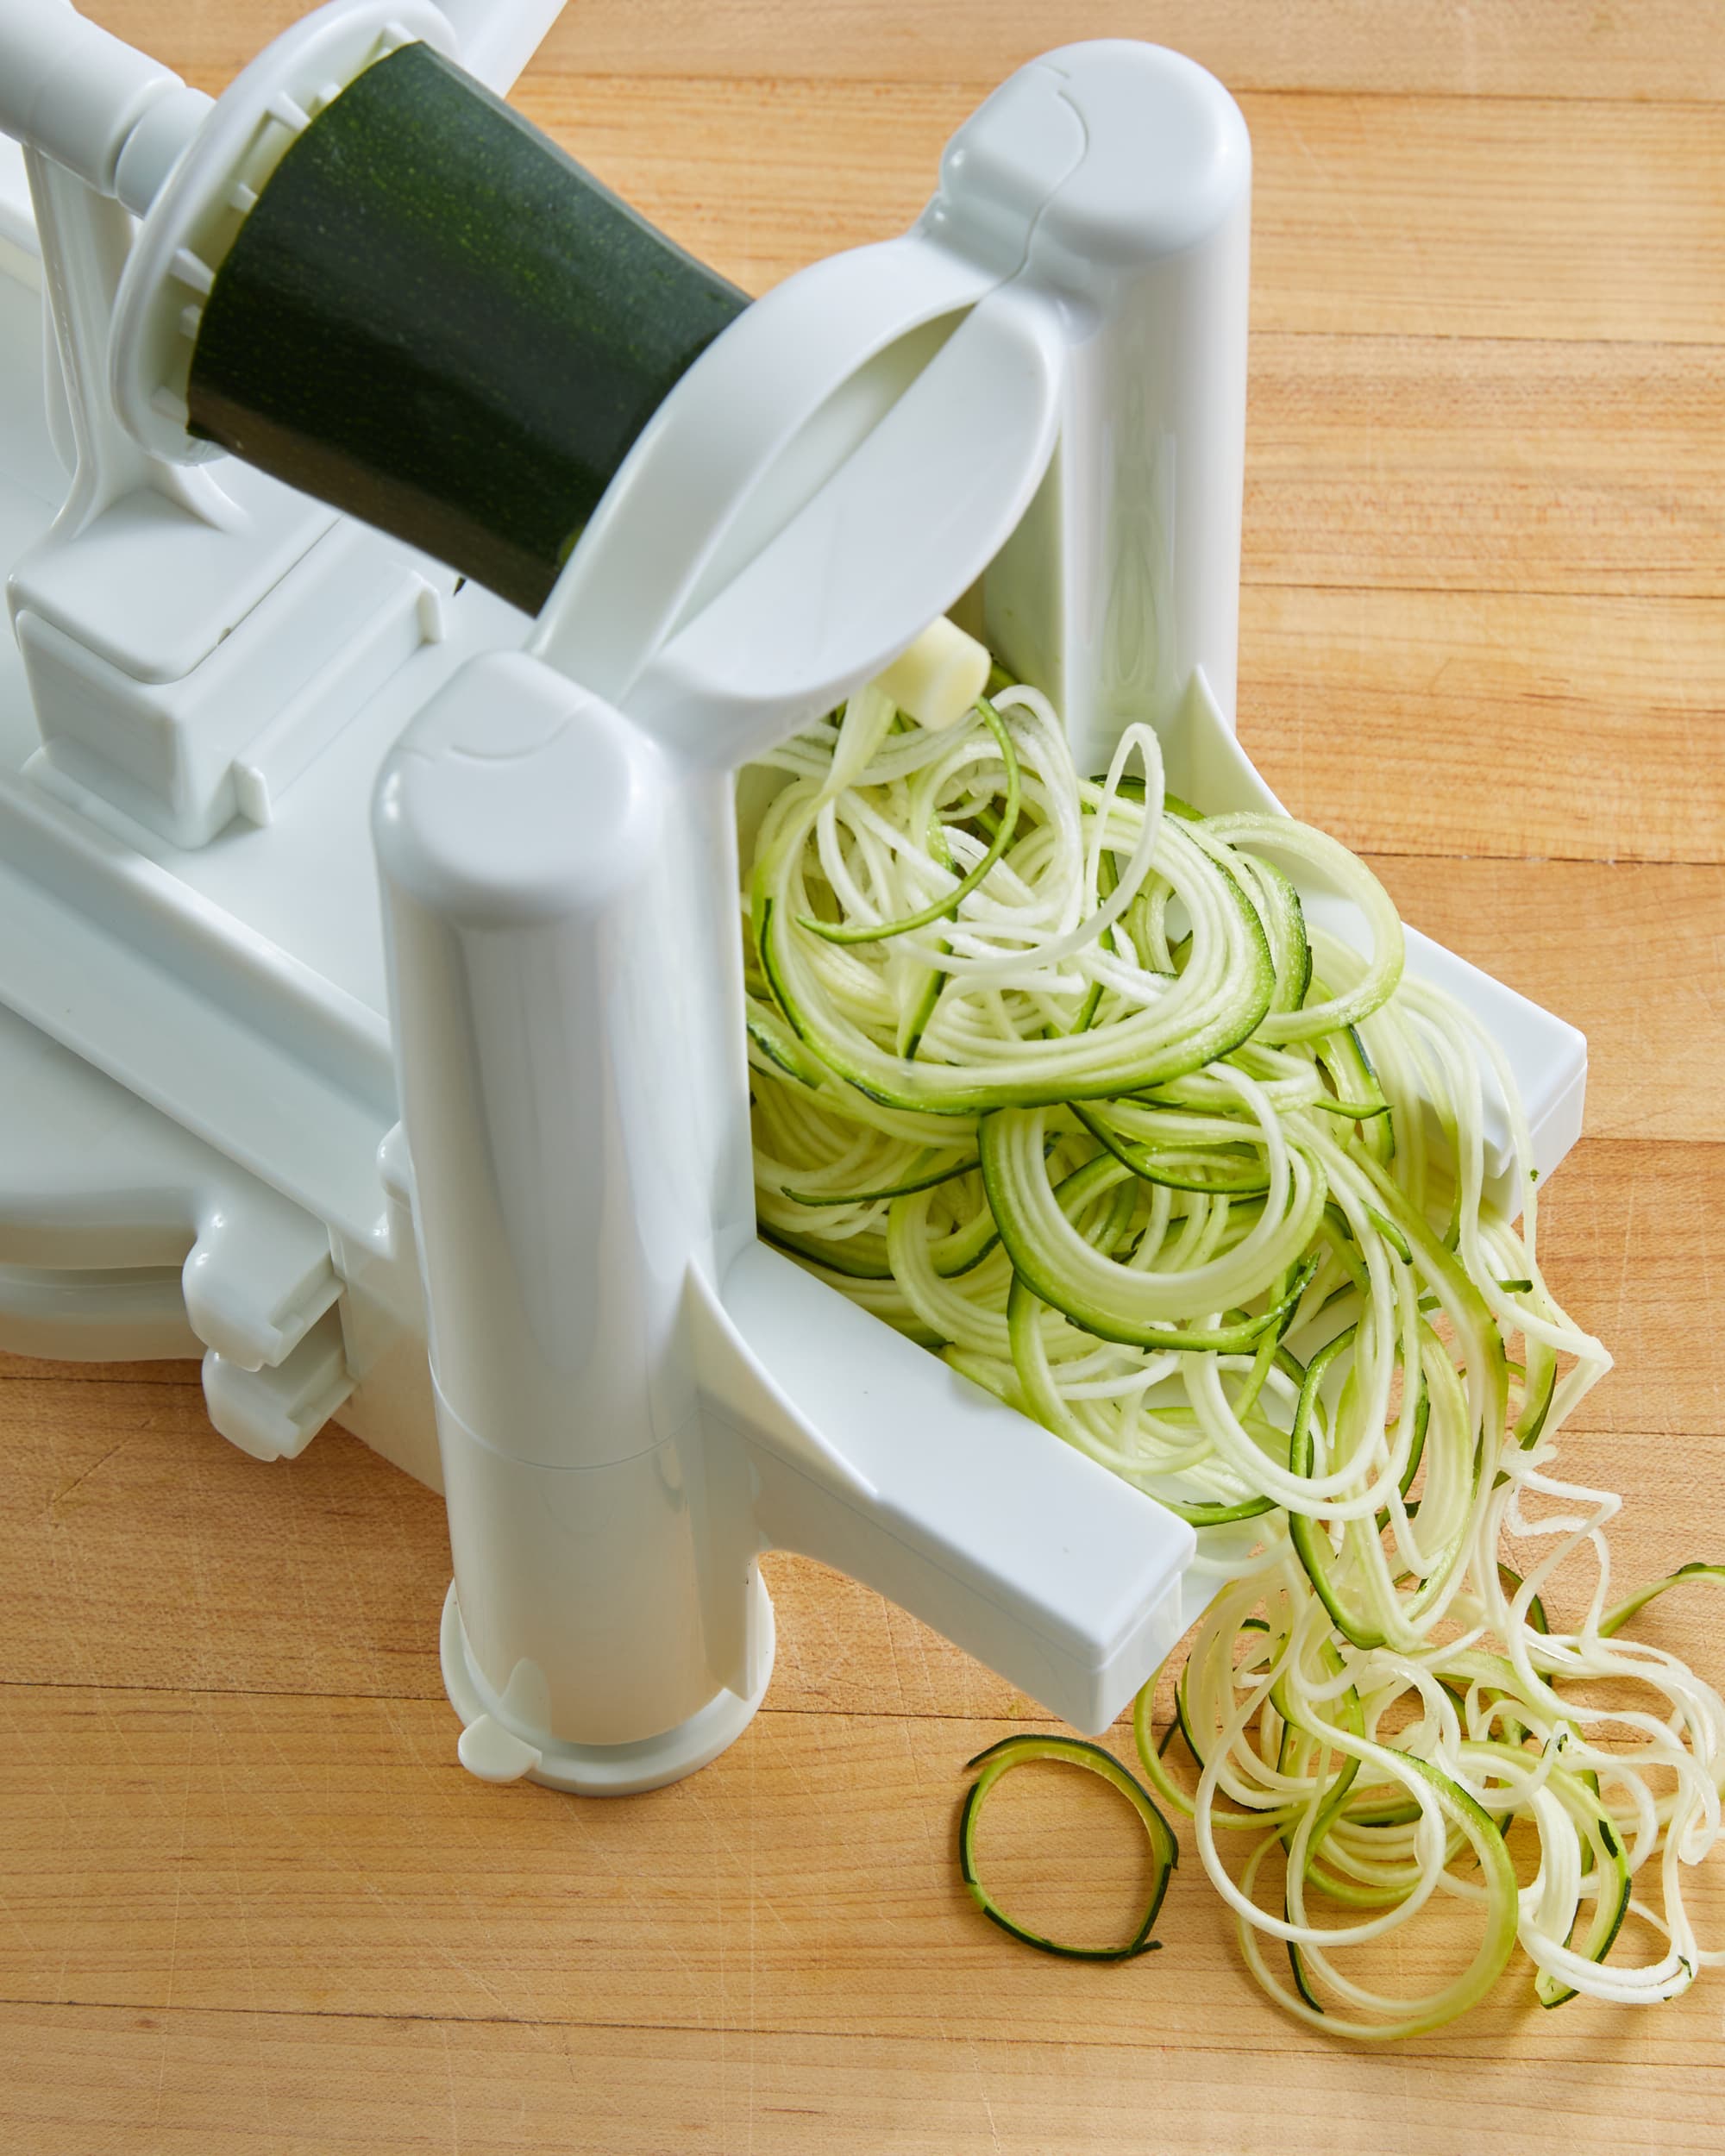 We Tested Four Different Tools for Making Zoodles — The Winner